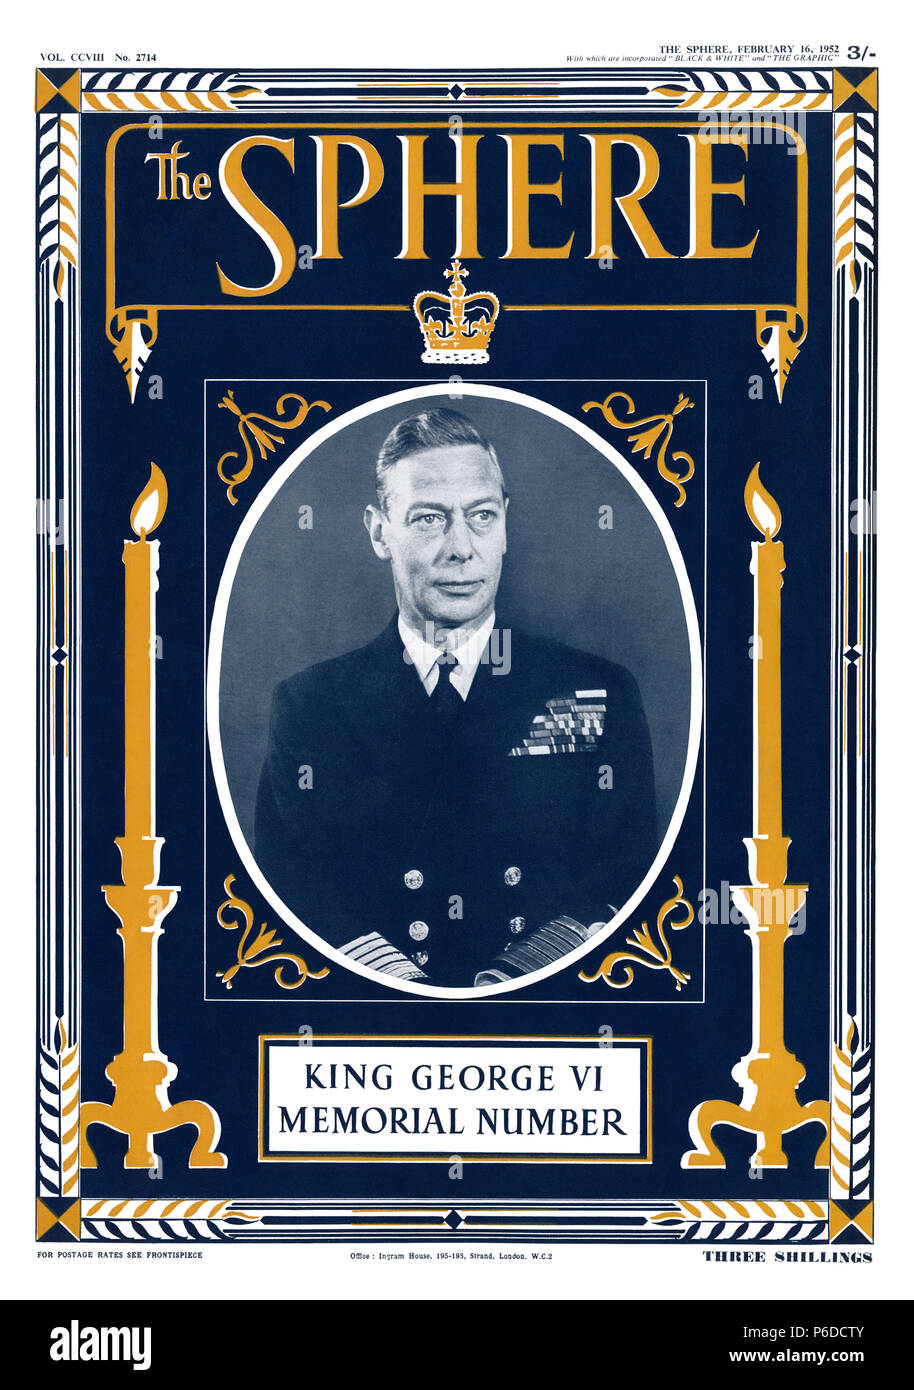 Vintage cover of The Sphere magazine King George VI Memorial Number, 16th February 1952. Stock Photo